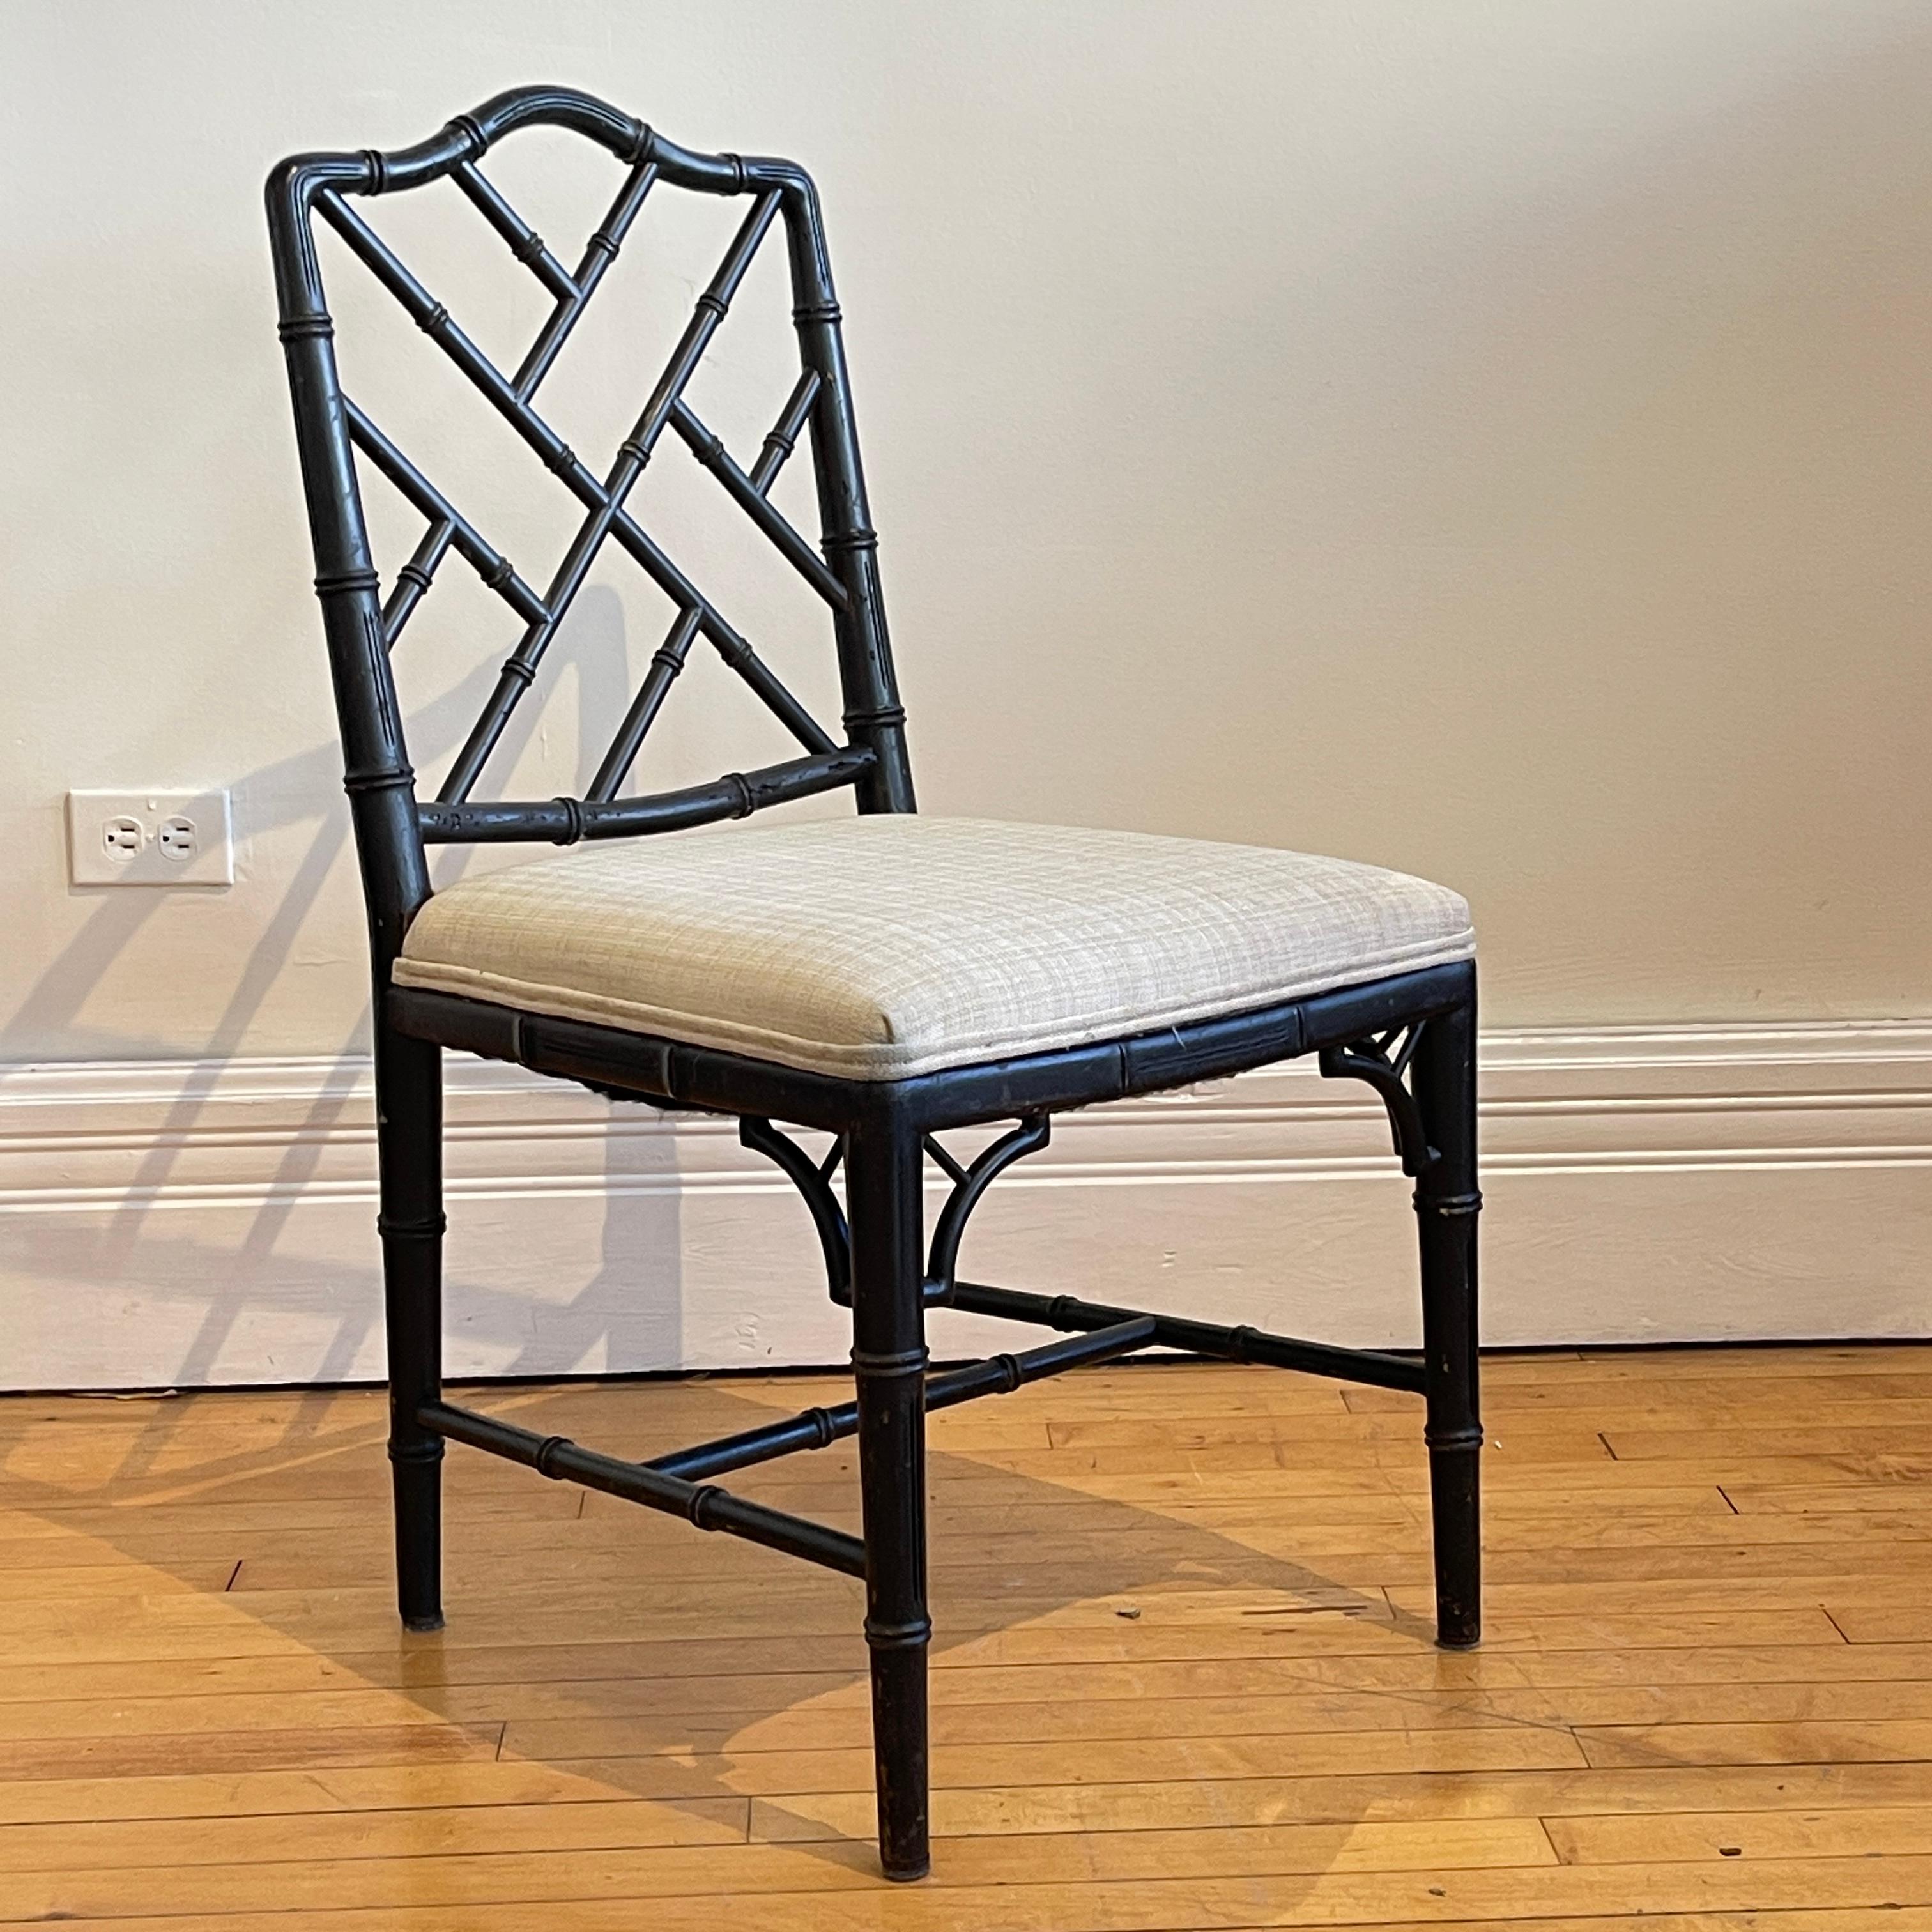 Set of 8 stunning faux bamboo wood chairs with cream colored heavy weave upholstery. Frames are carved hardwood with a lovely painted faux bois finish. This is a fabulously unique and usable set.

.